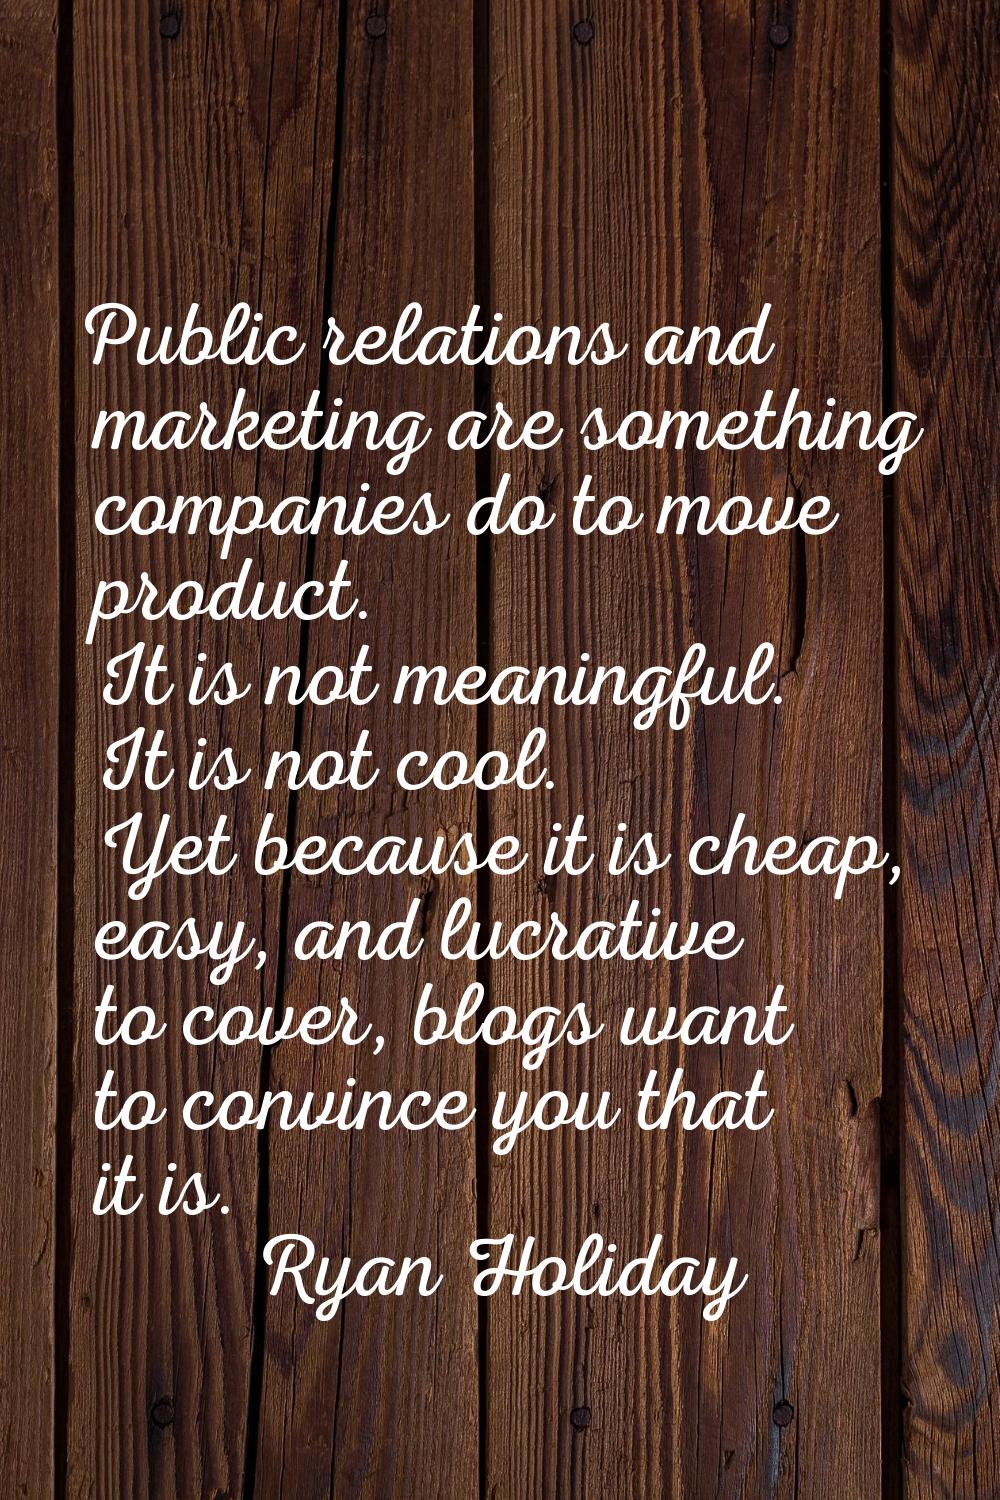 Public relations and marketing are something companies do to move product. It is not meaningful. It